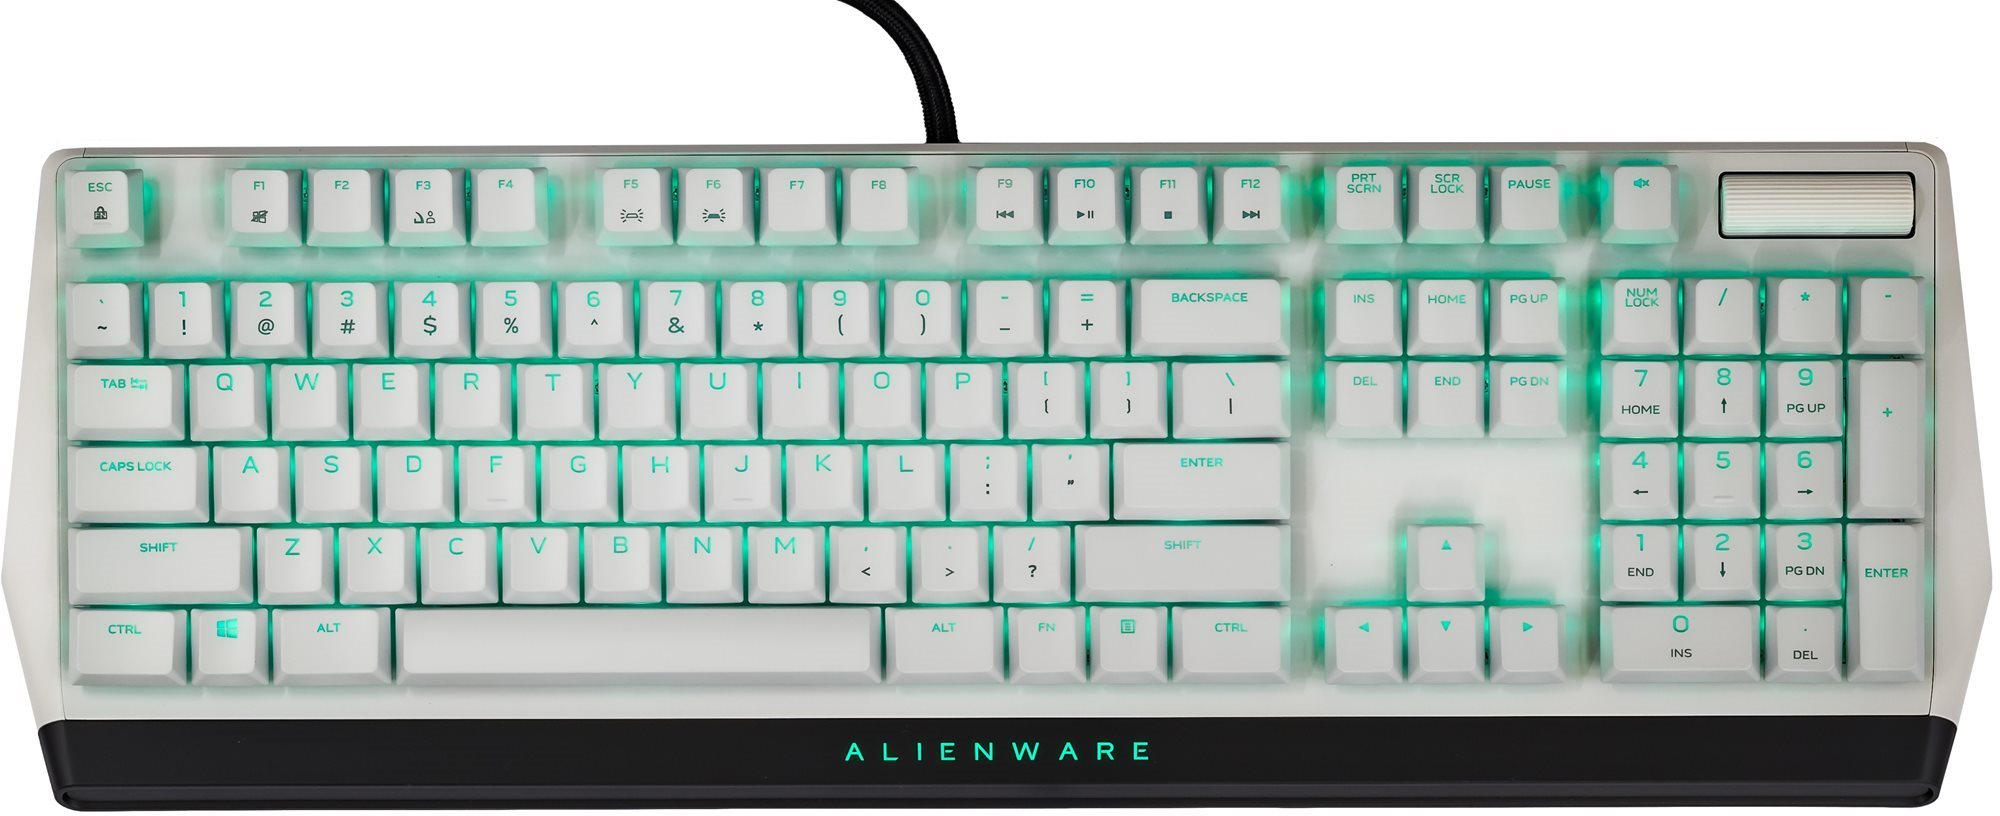 Dell Alienware AW510K Low-profile RGB Mechanical Gaming Keyboard Lunar Light - US